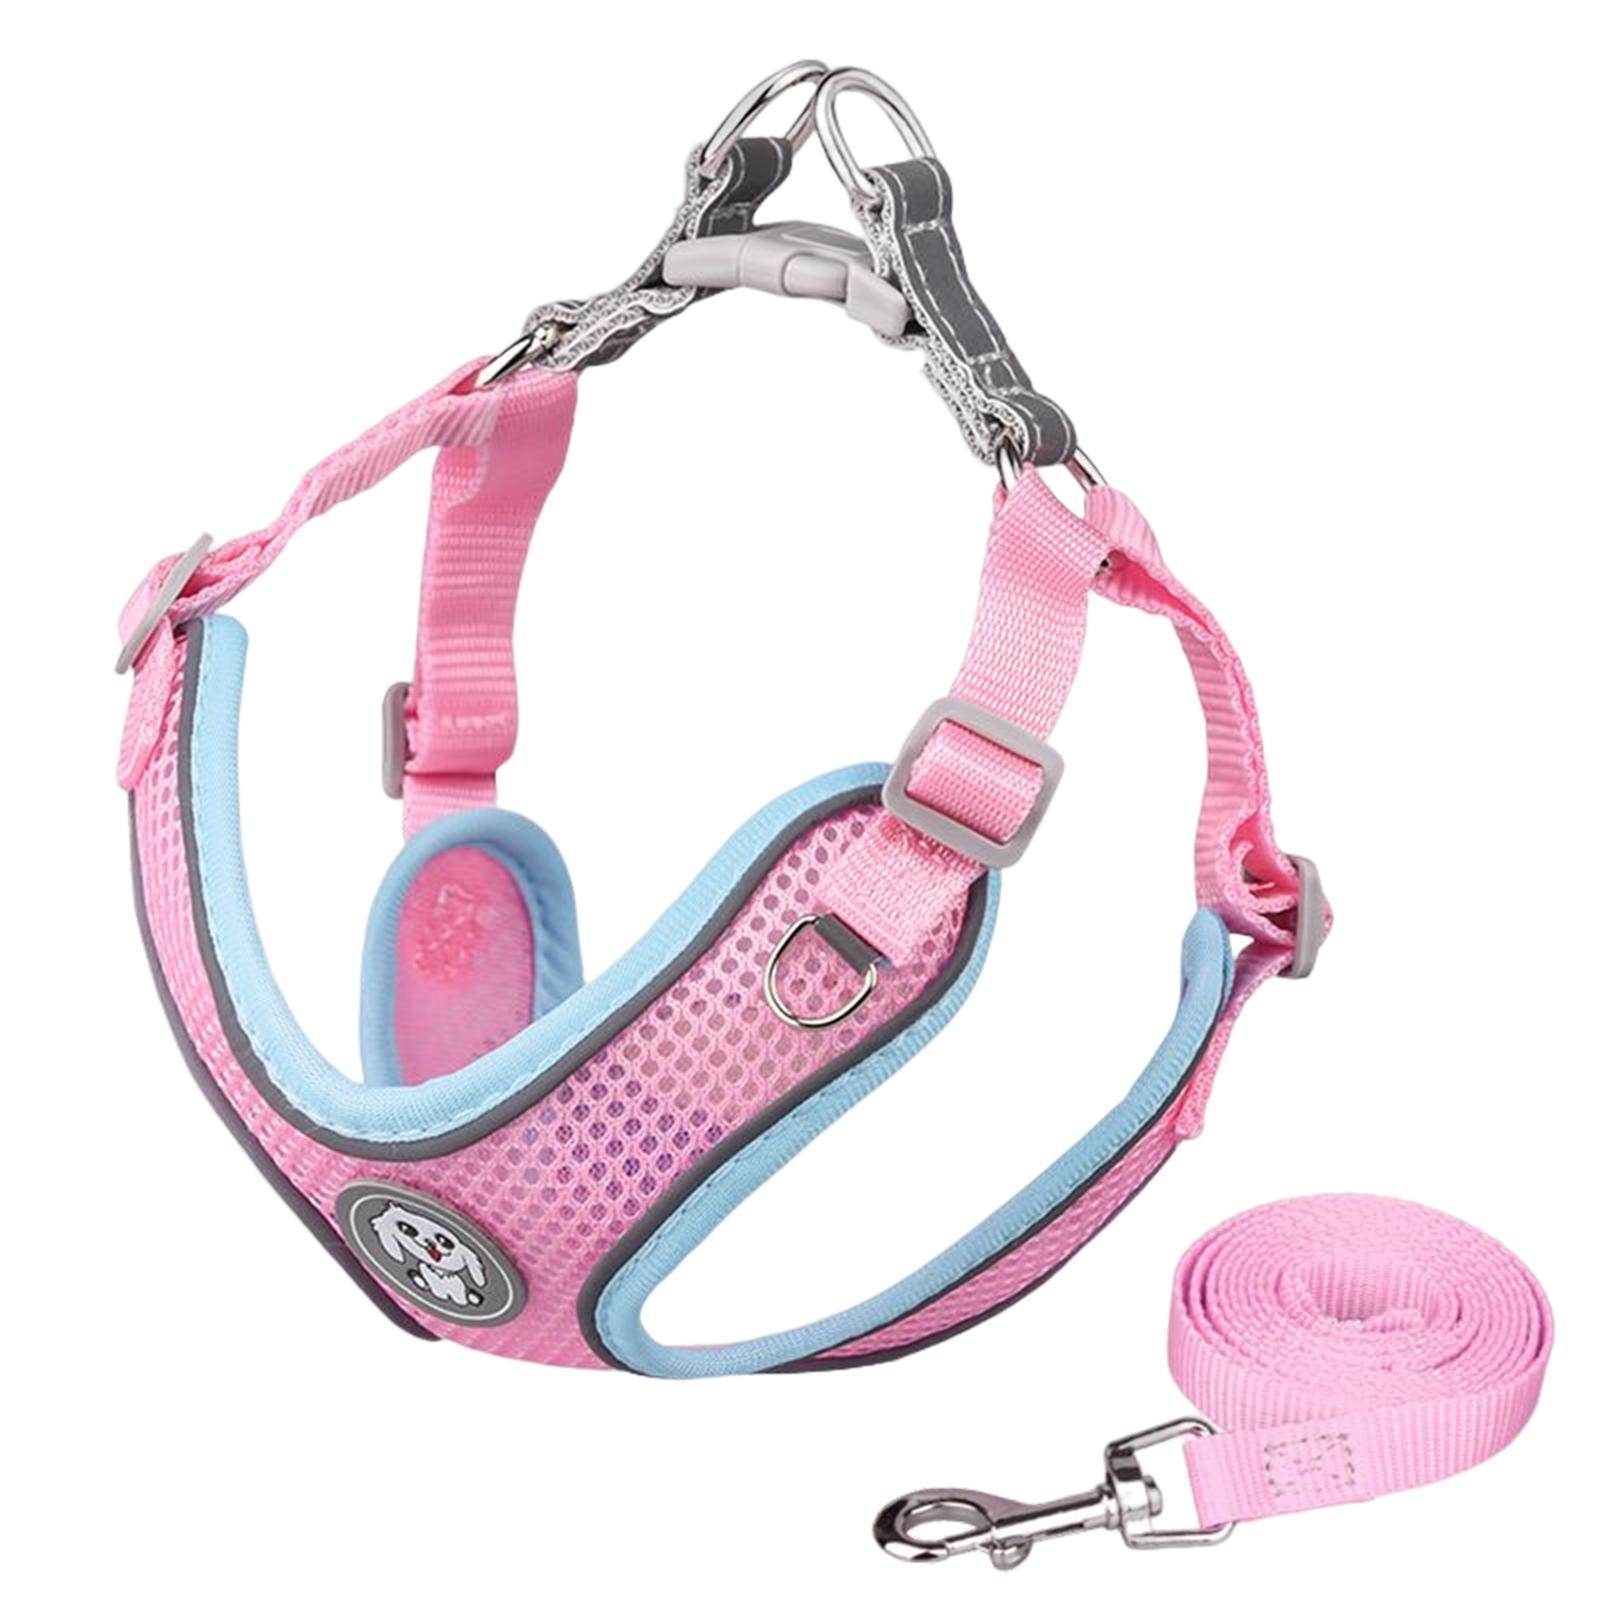 Dog Harness and Leash Set Padded Mesh Vest for Training Walking S Pink